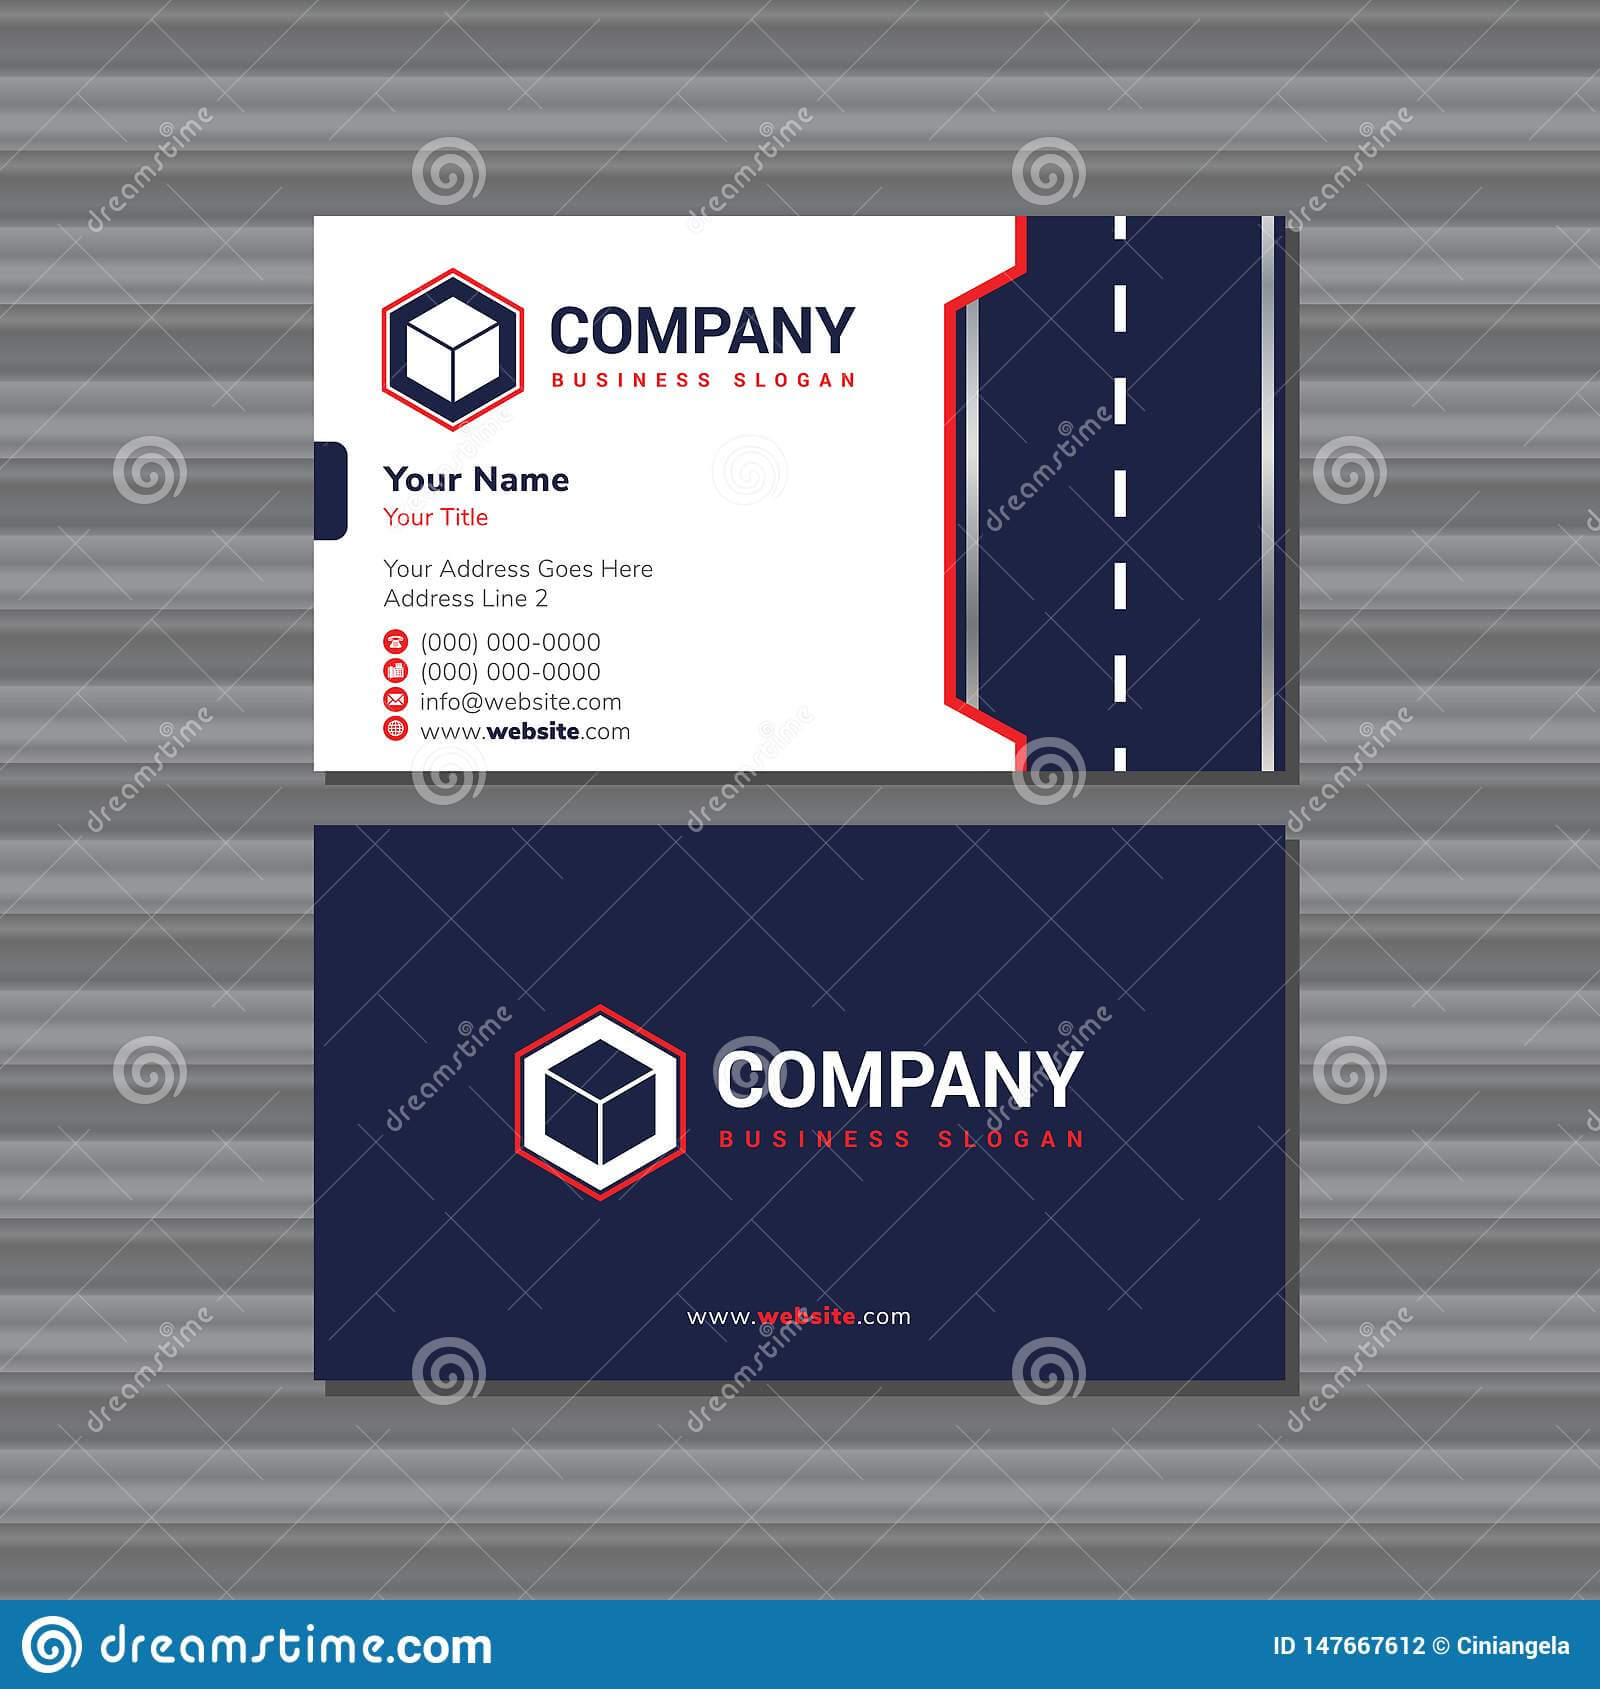 Road Business Card Design For Car, Taxi, Transportation Within Transport Business Cards Templates Free